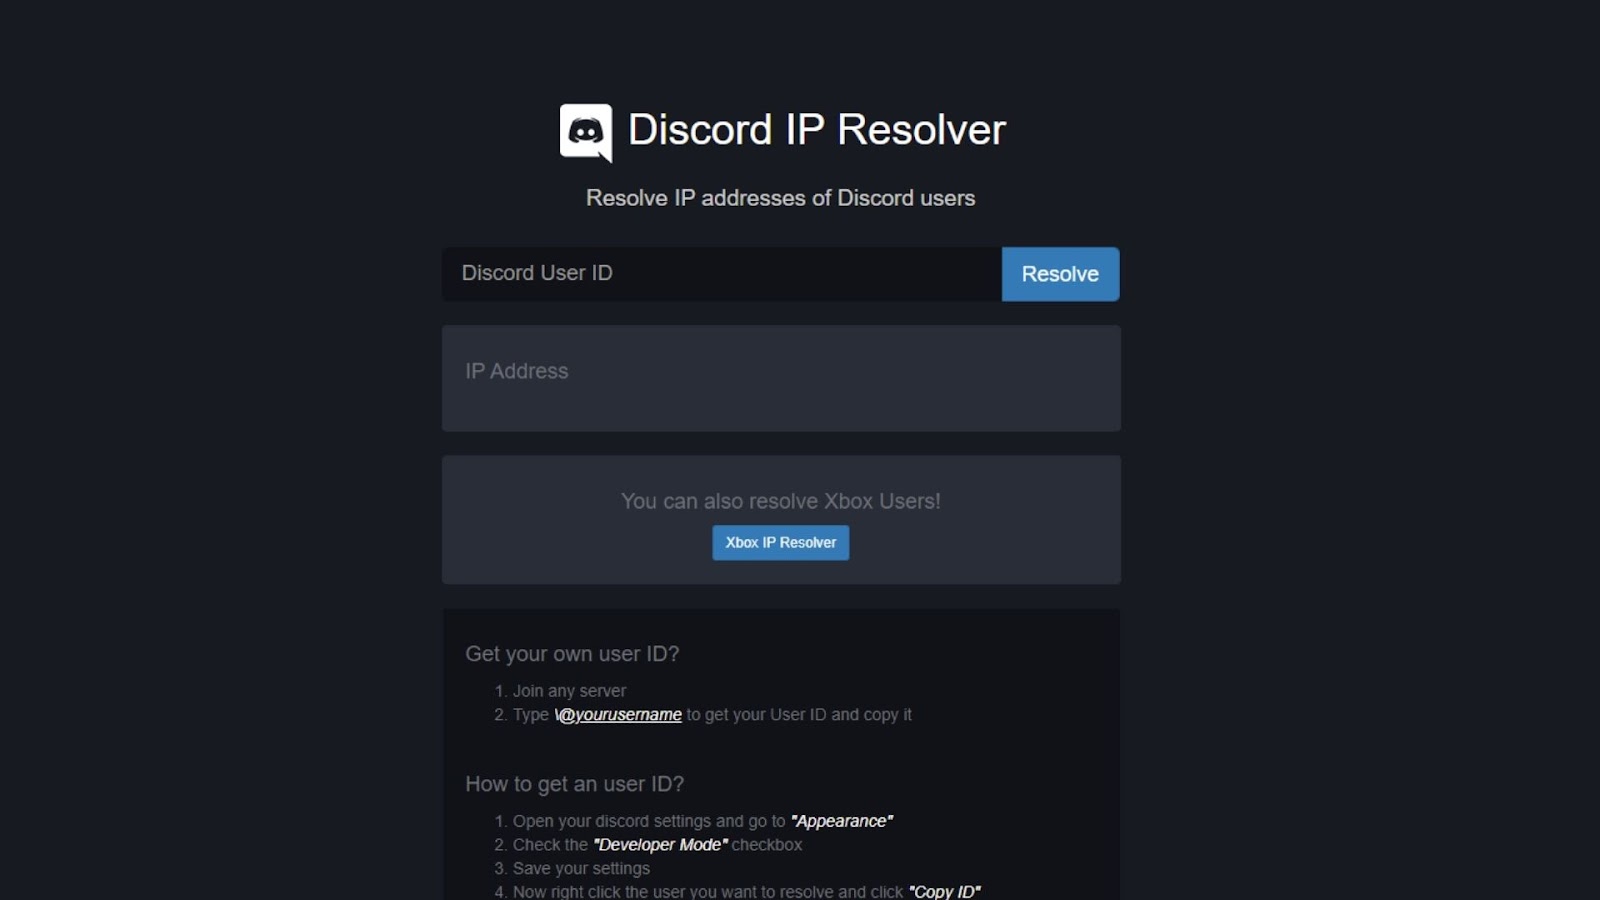 Go to Use the Discord IP Resolver